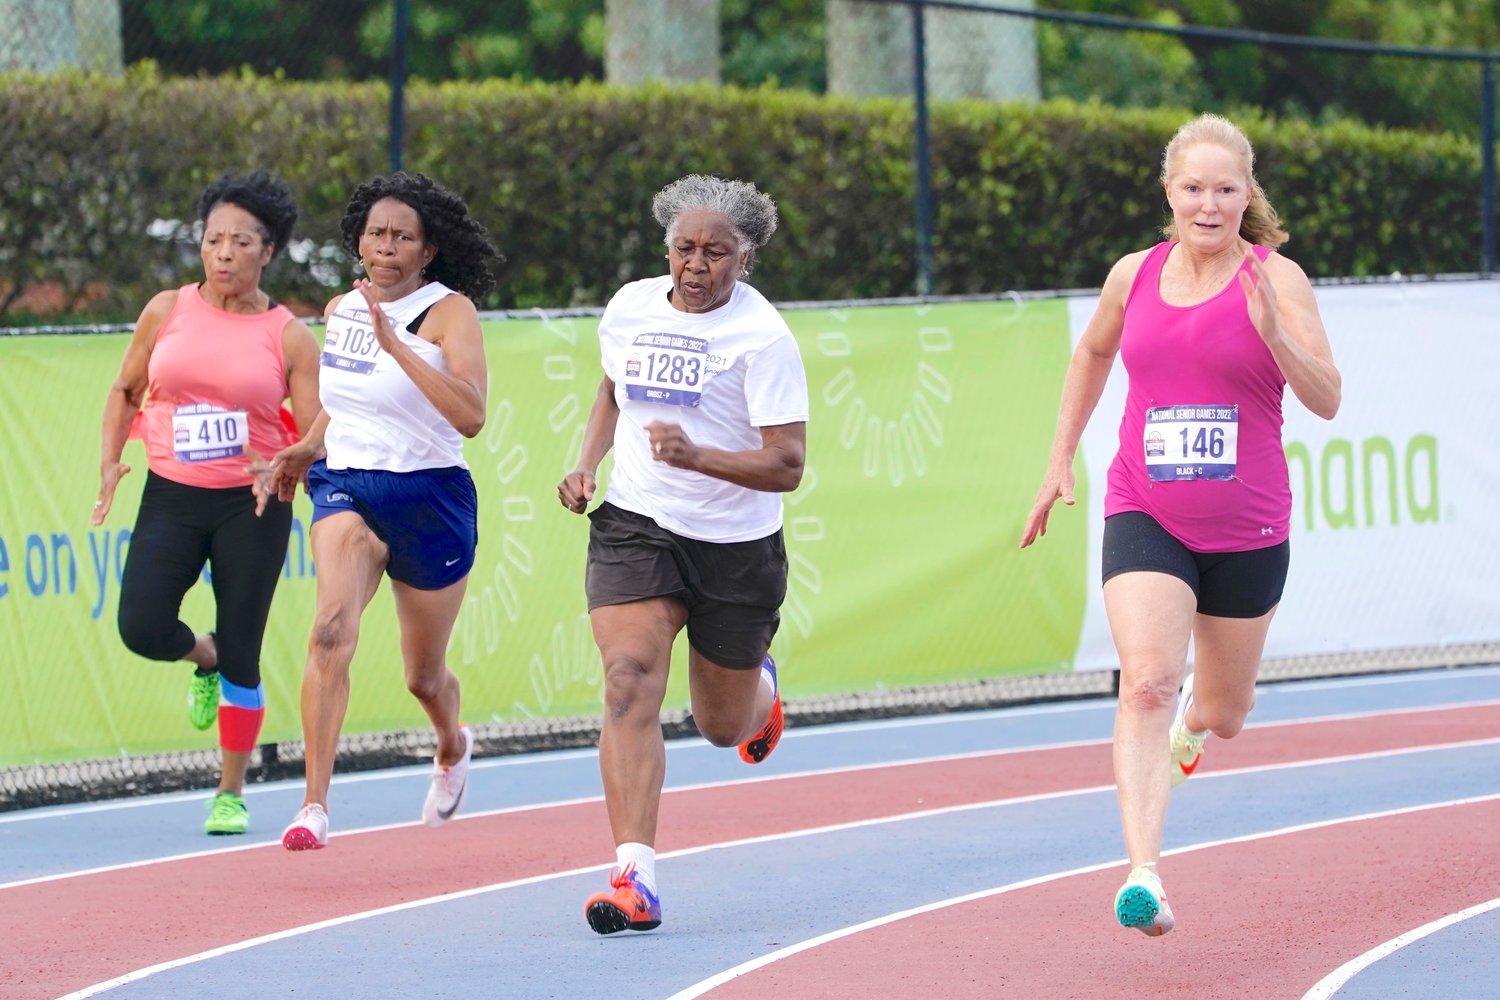 An over 60 years and older group of women run a 200 meter race during the National Senior Games, Monday, May 16, in Miramar, Fla.